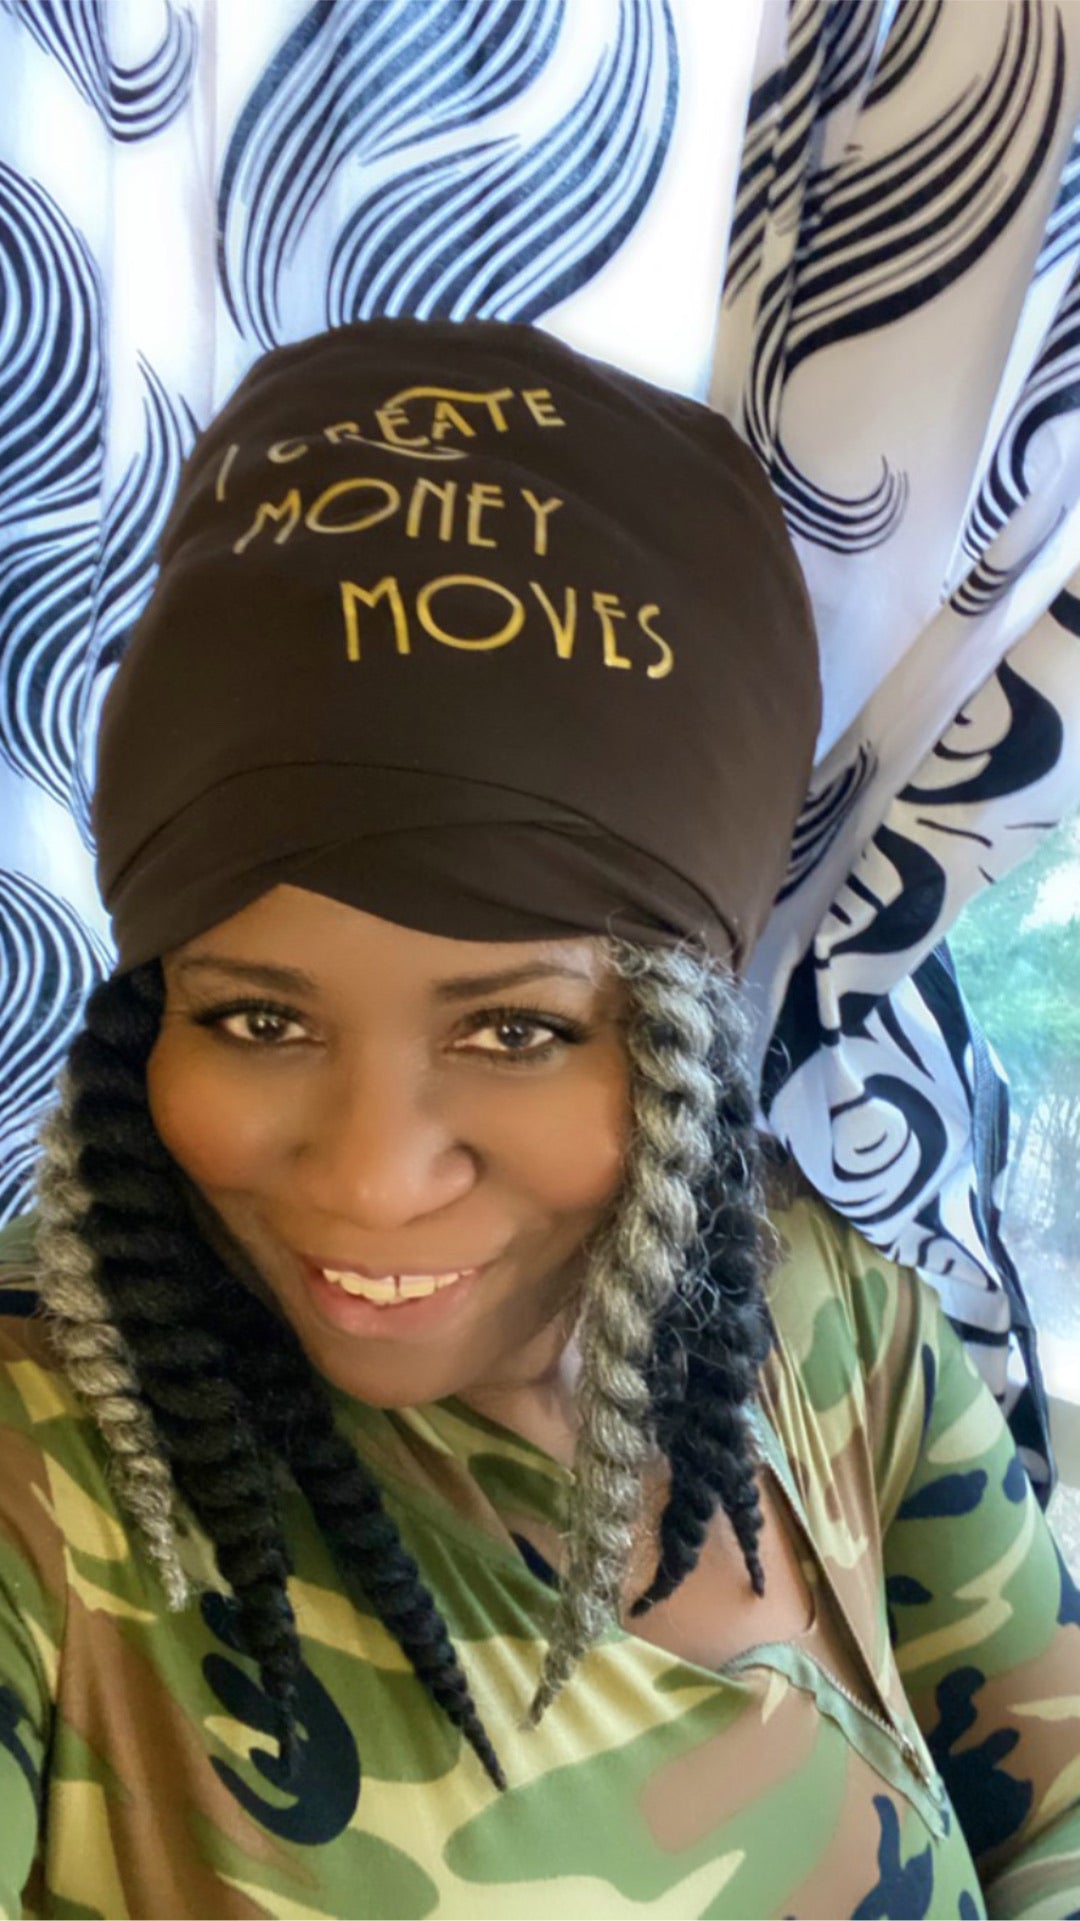 I  Create  Money Moves Stretch Hat